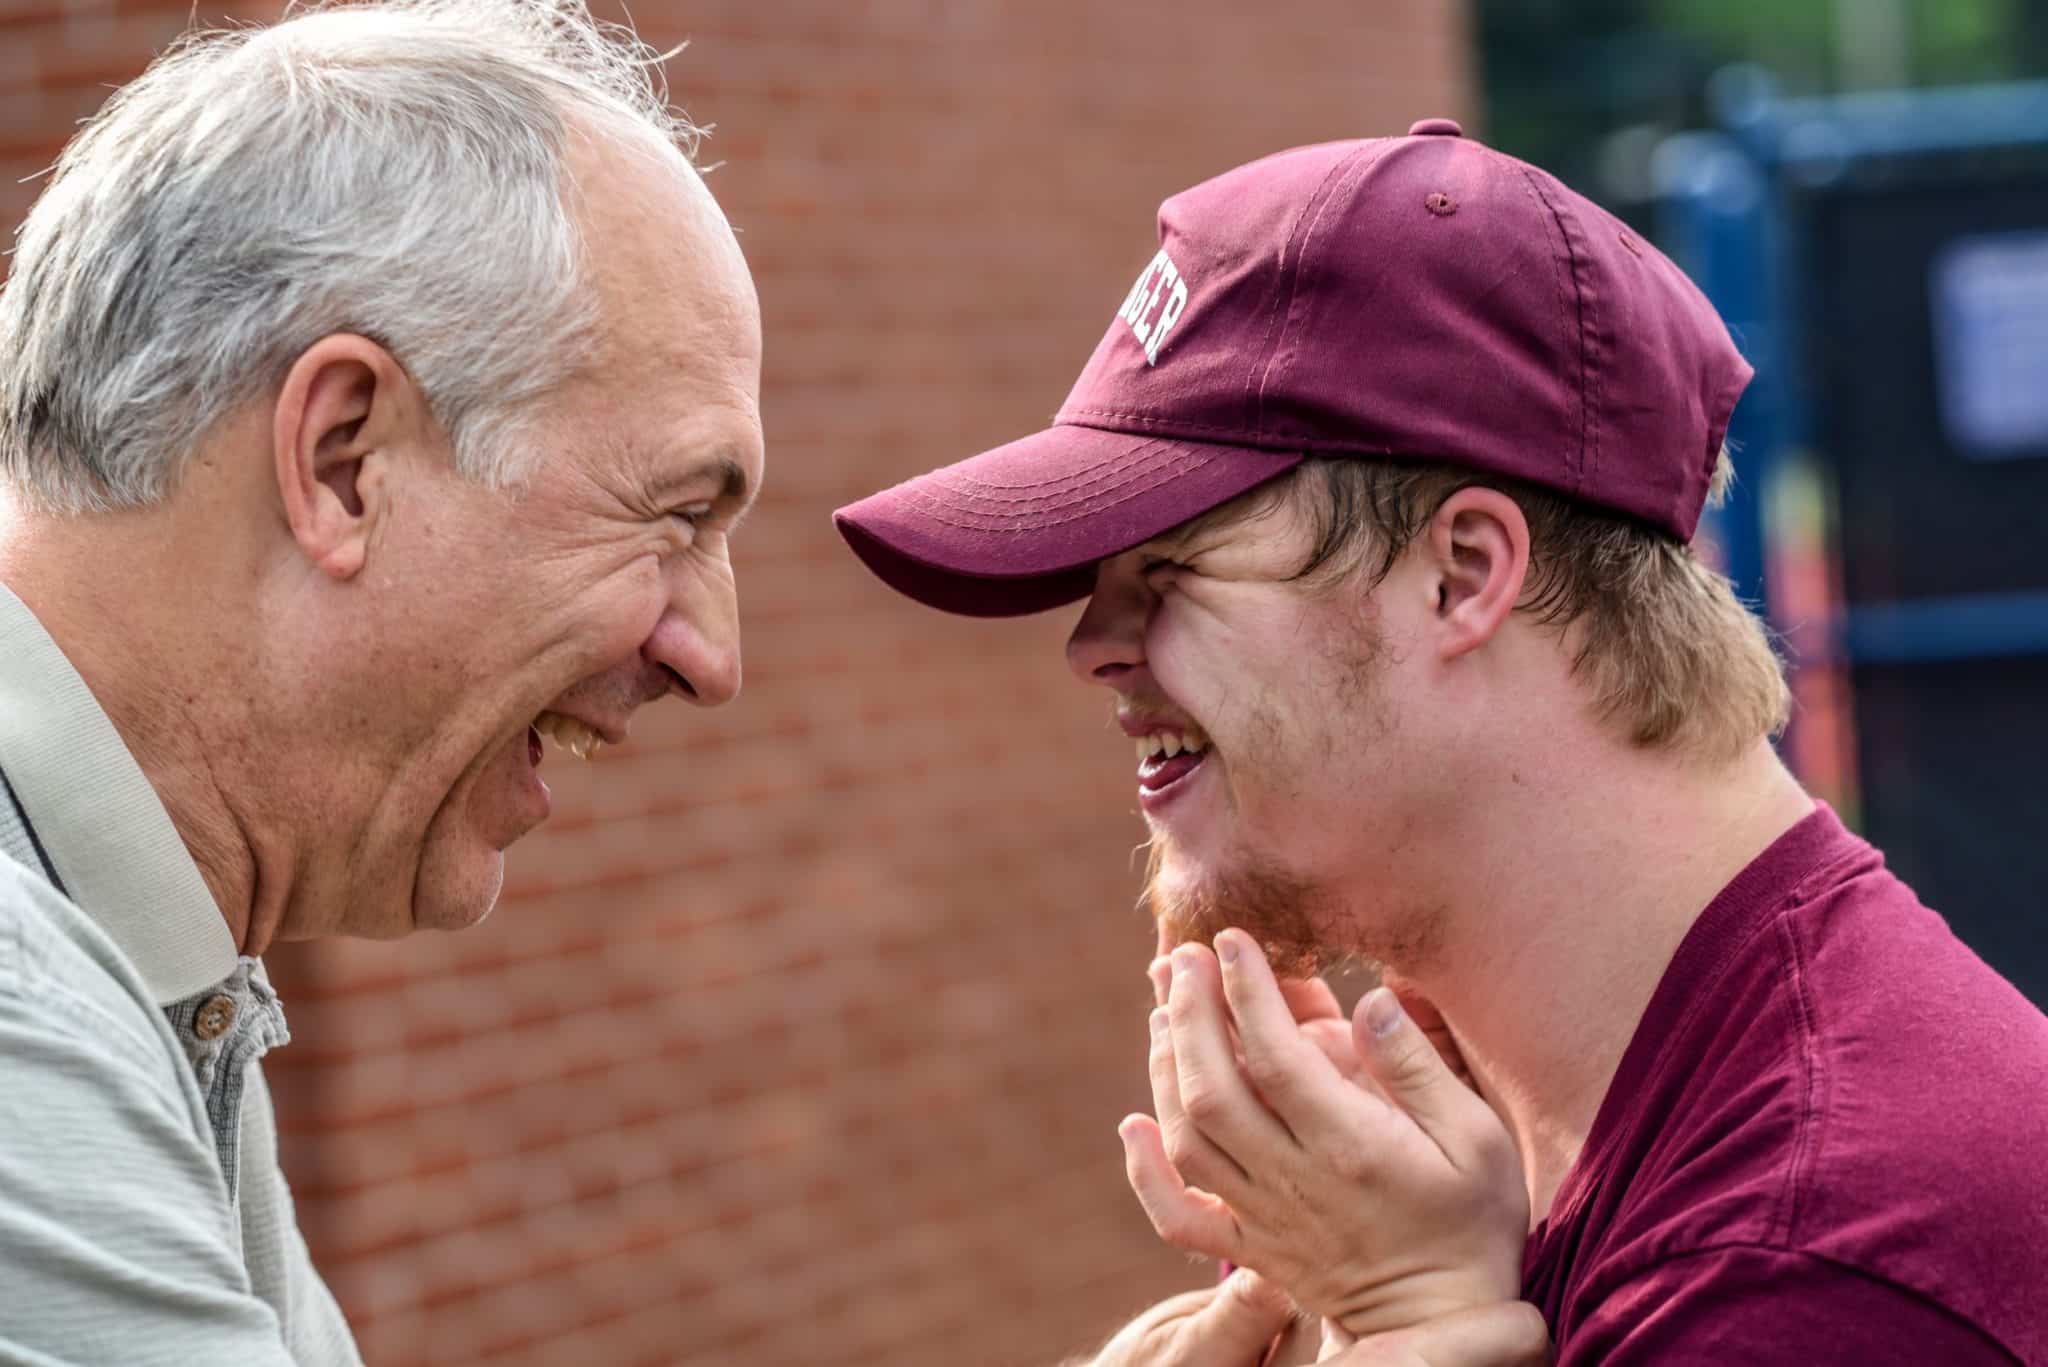 An elderly man smiling and laughing with a young man who appears to have down-syndrome.